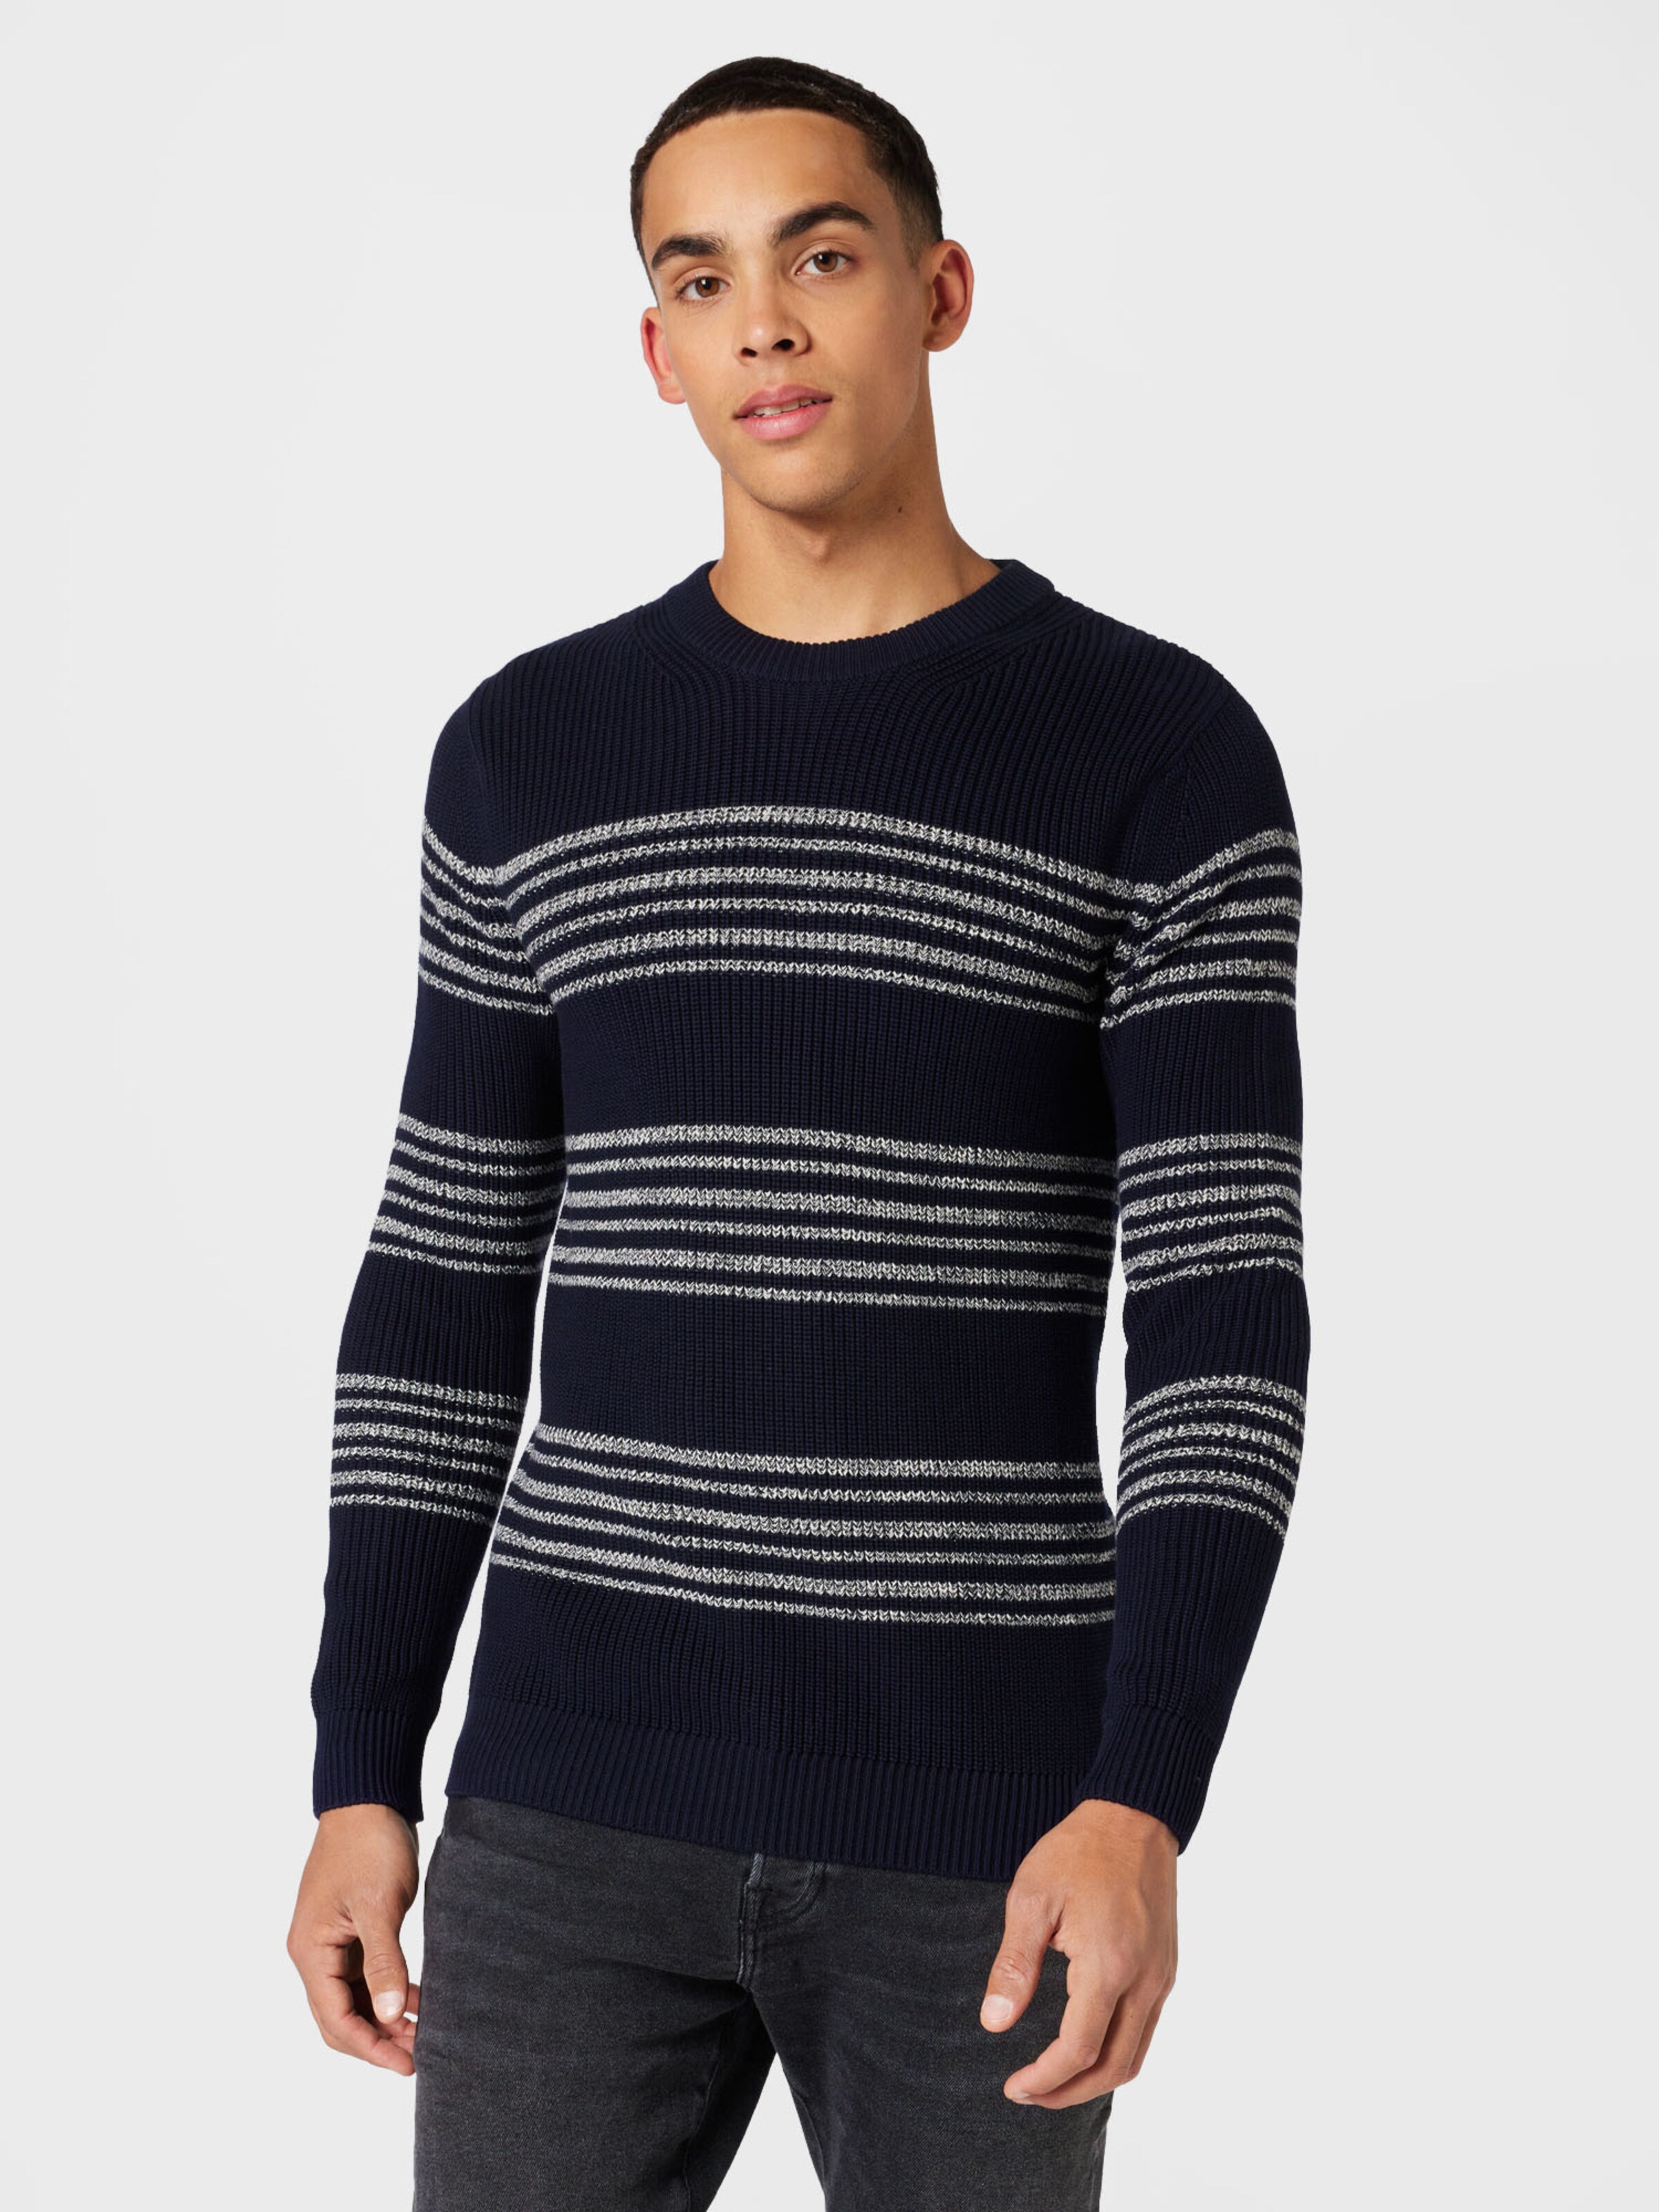 Pullover ABOUT YOU Herren Kleidung Pullover & Strickjacken Pullover Strickpullover 